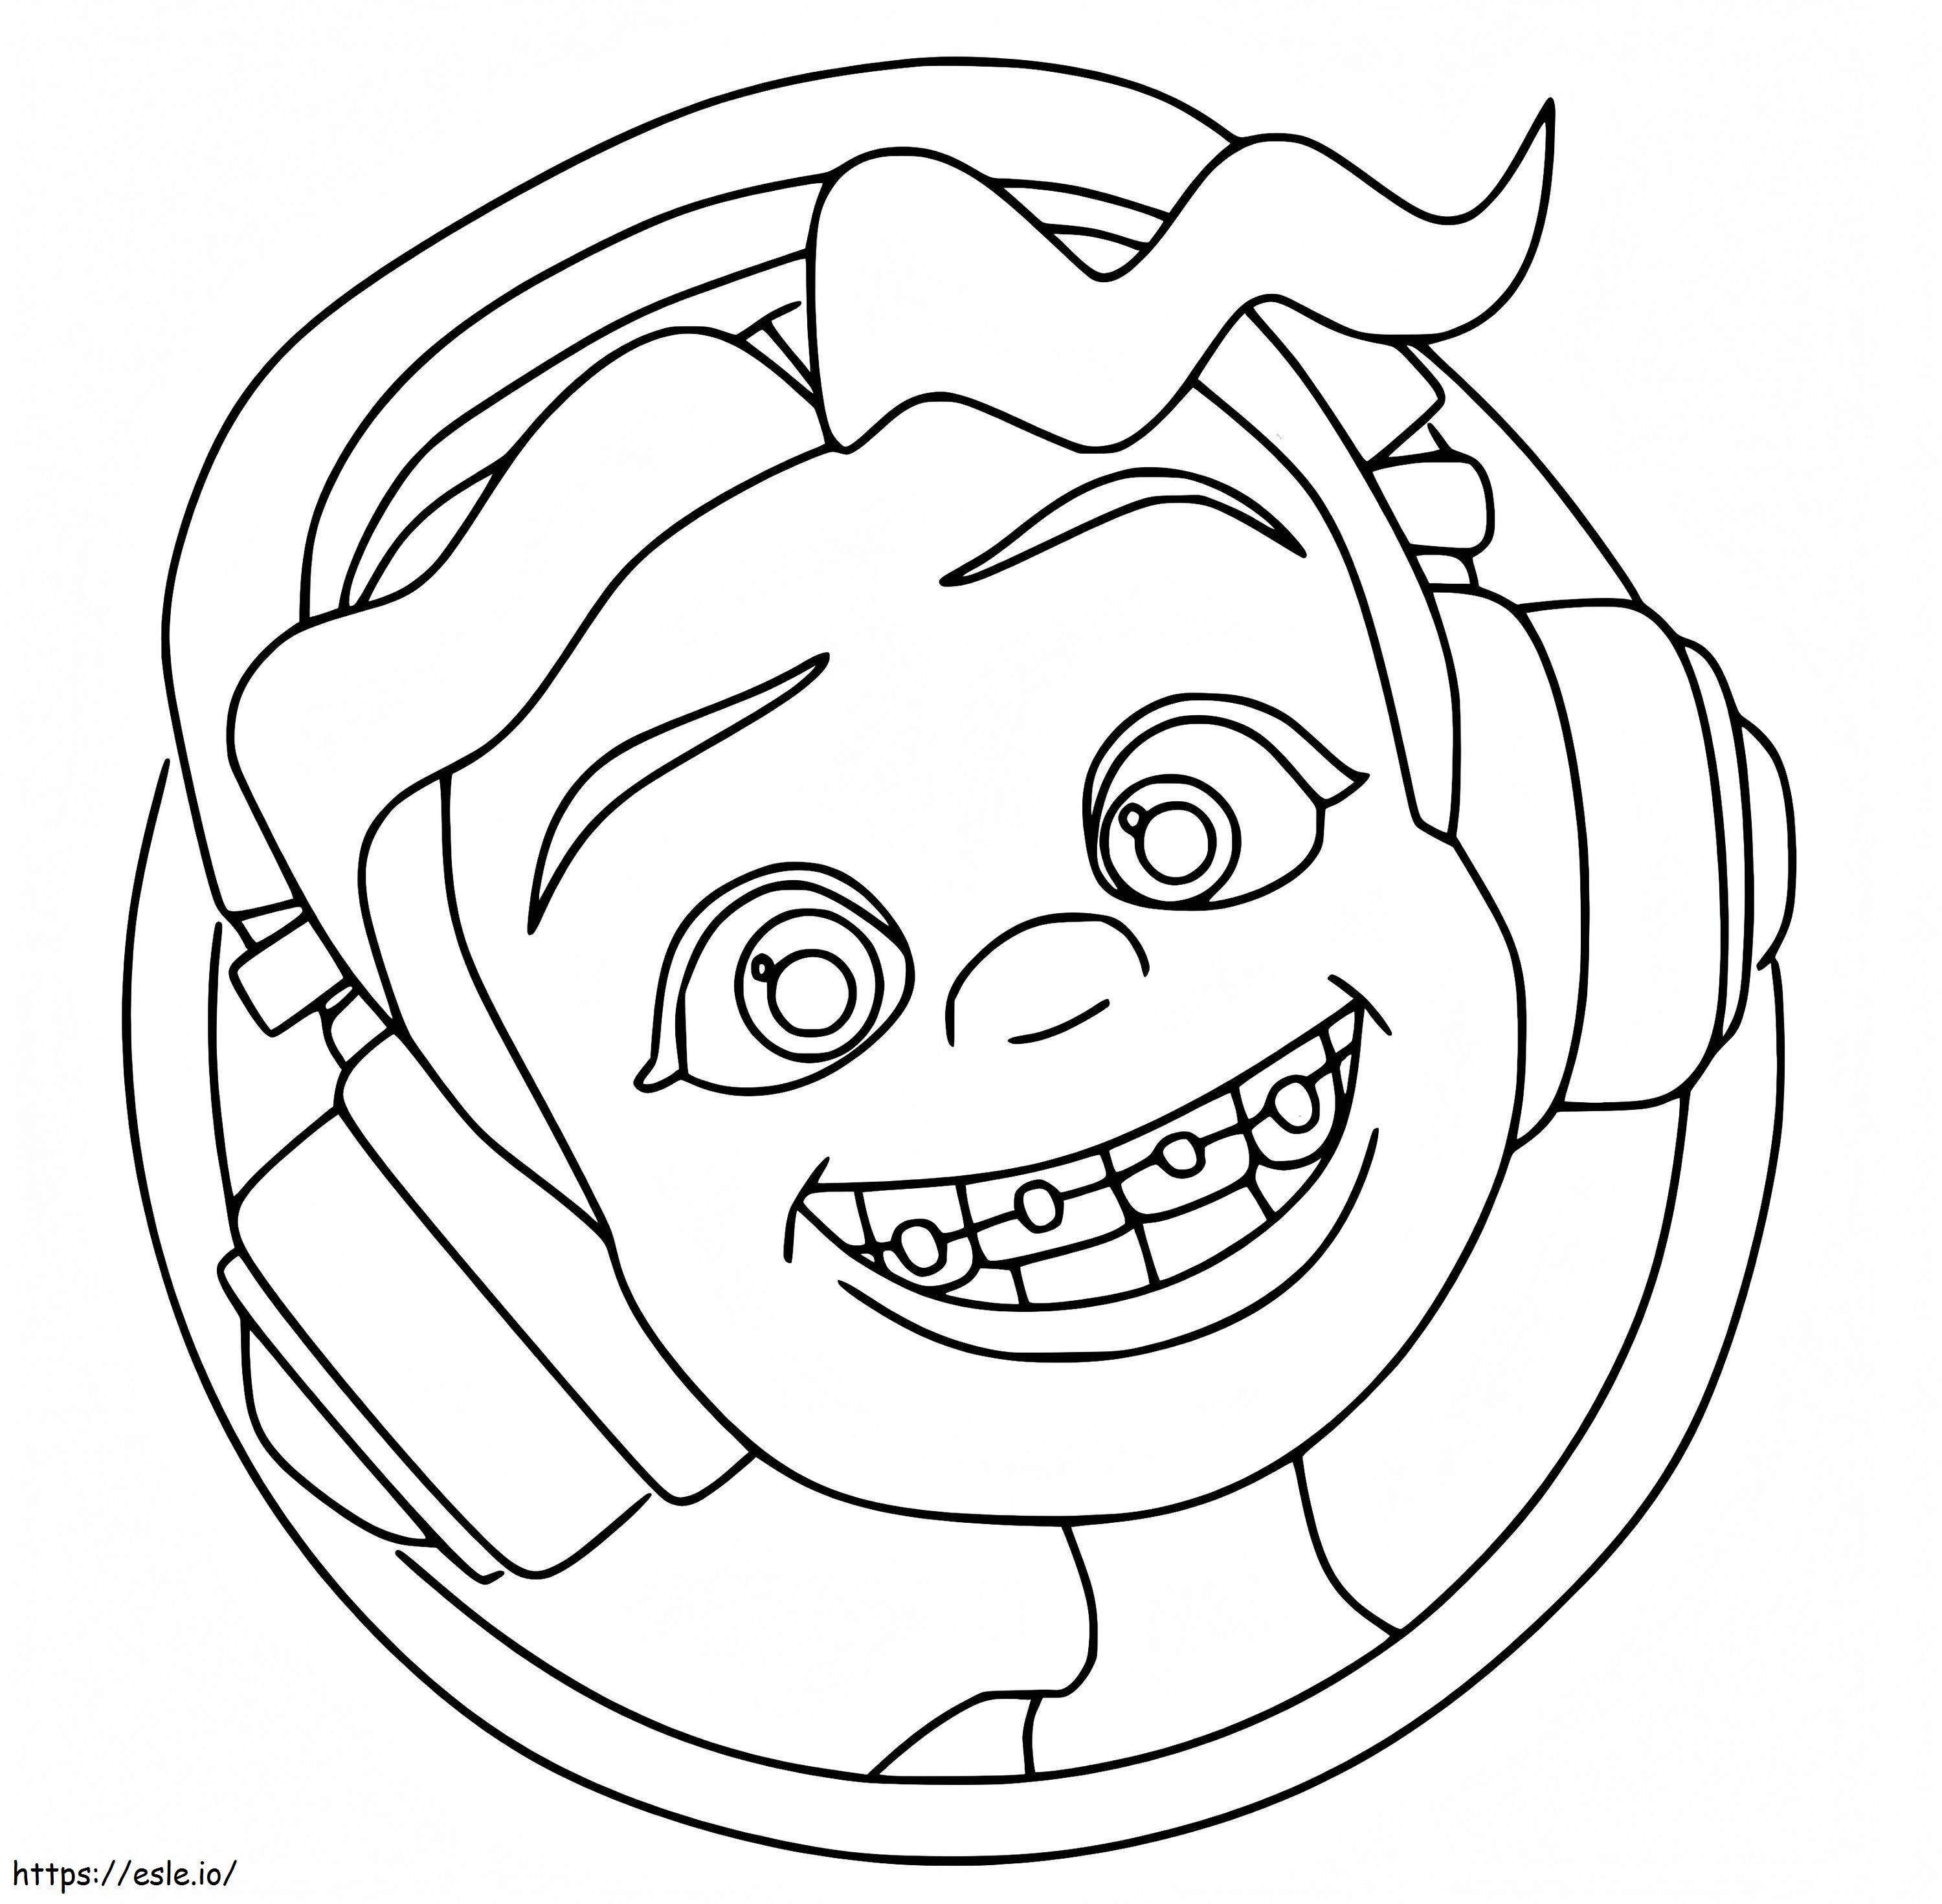 Singer Dolores coloring page